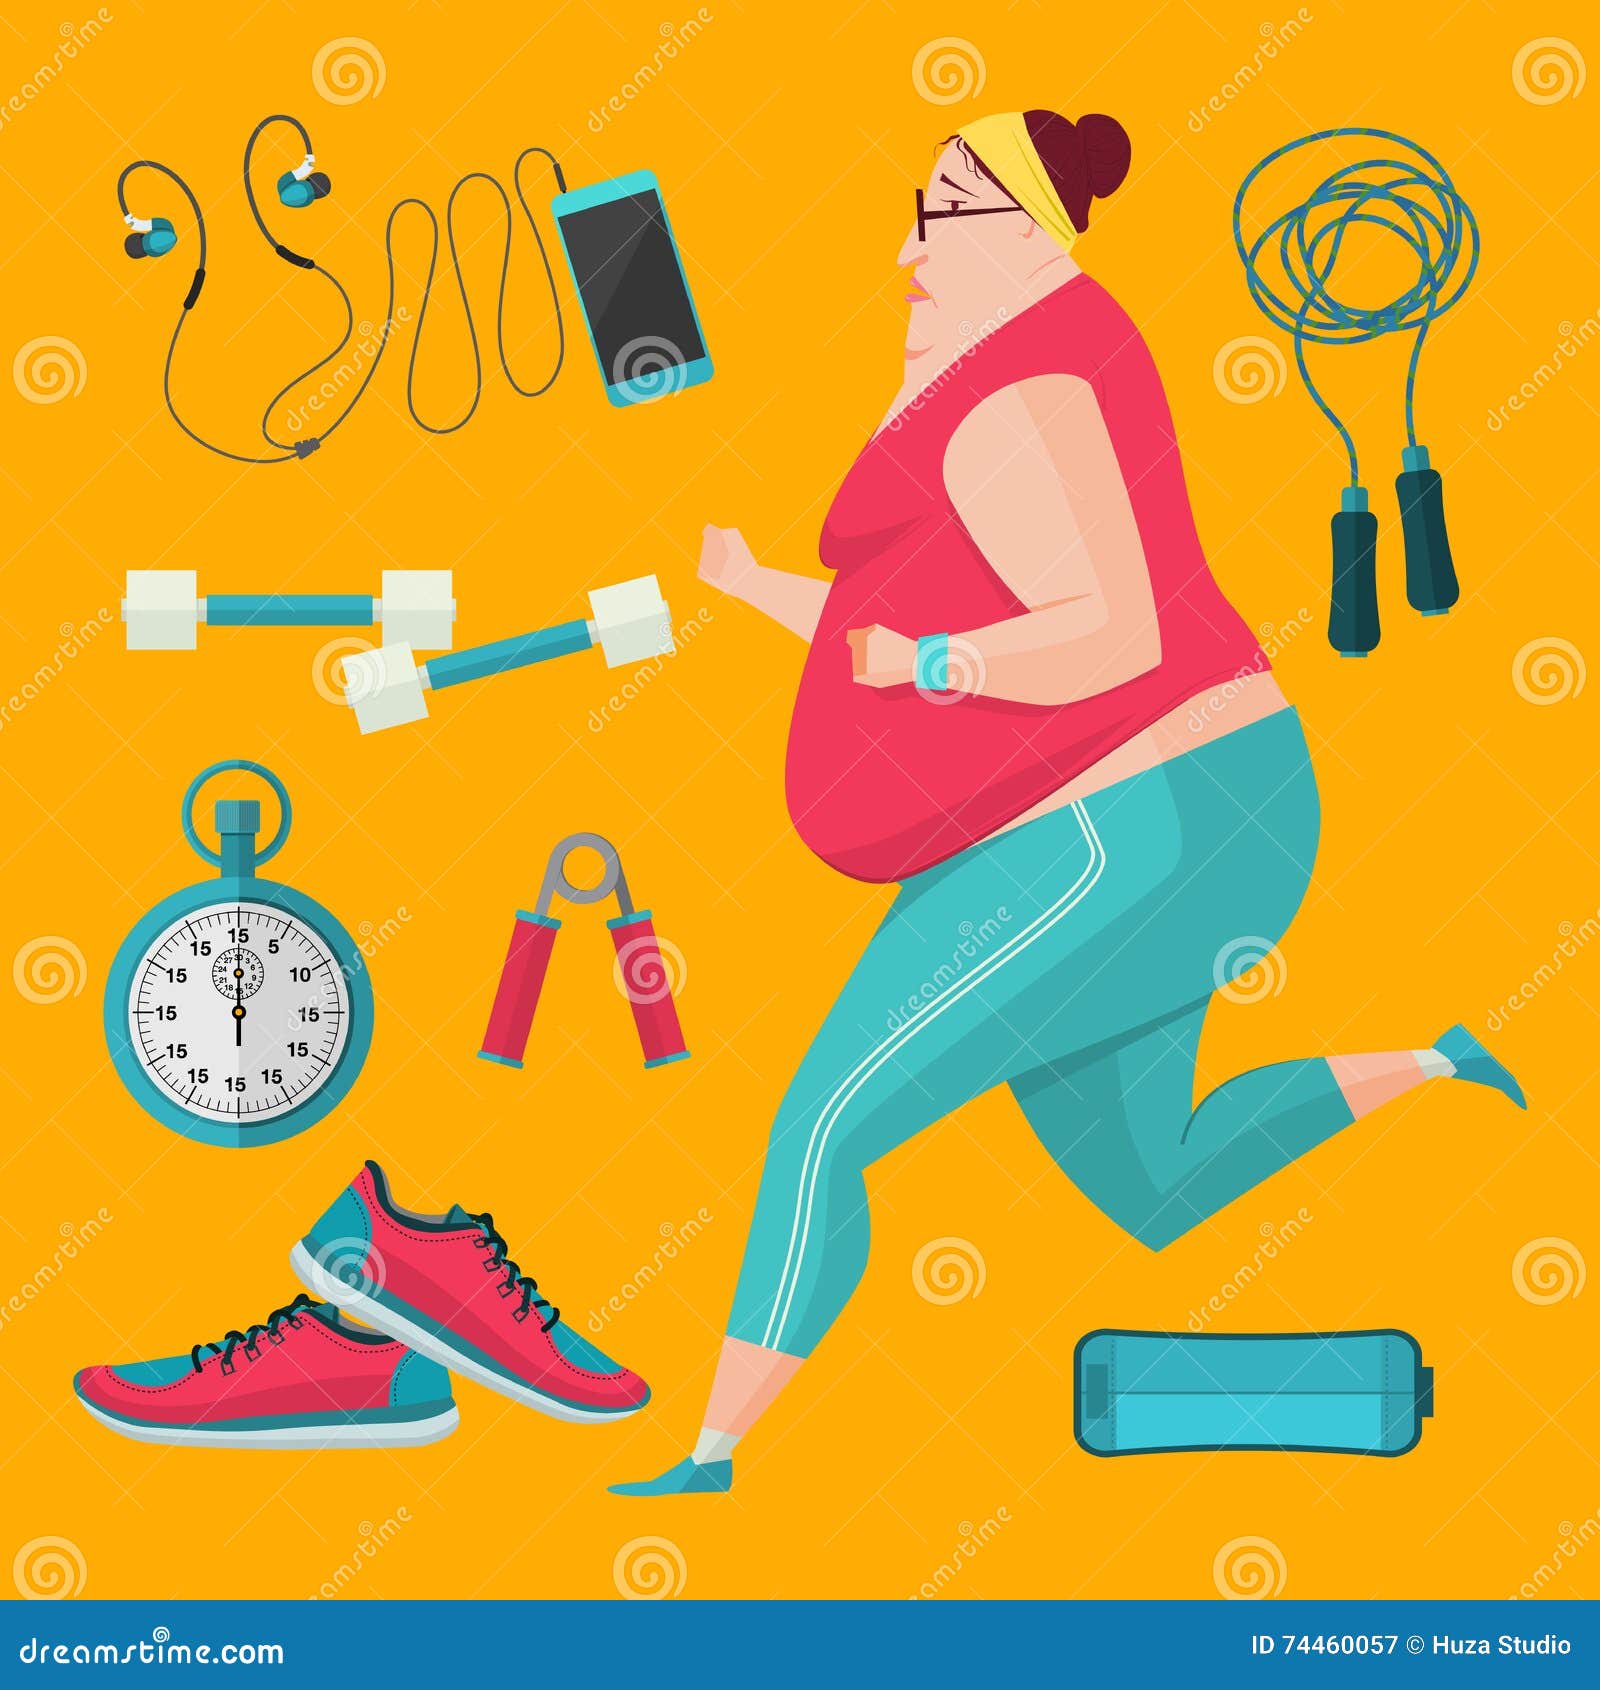 Obese Women Jogging To Lose Weight. Stock Vector - Illustration of fitness,  fatigue: 74460057